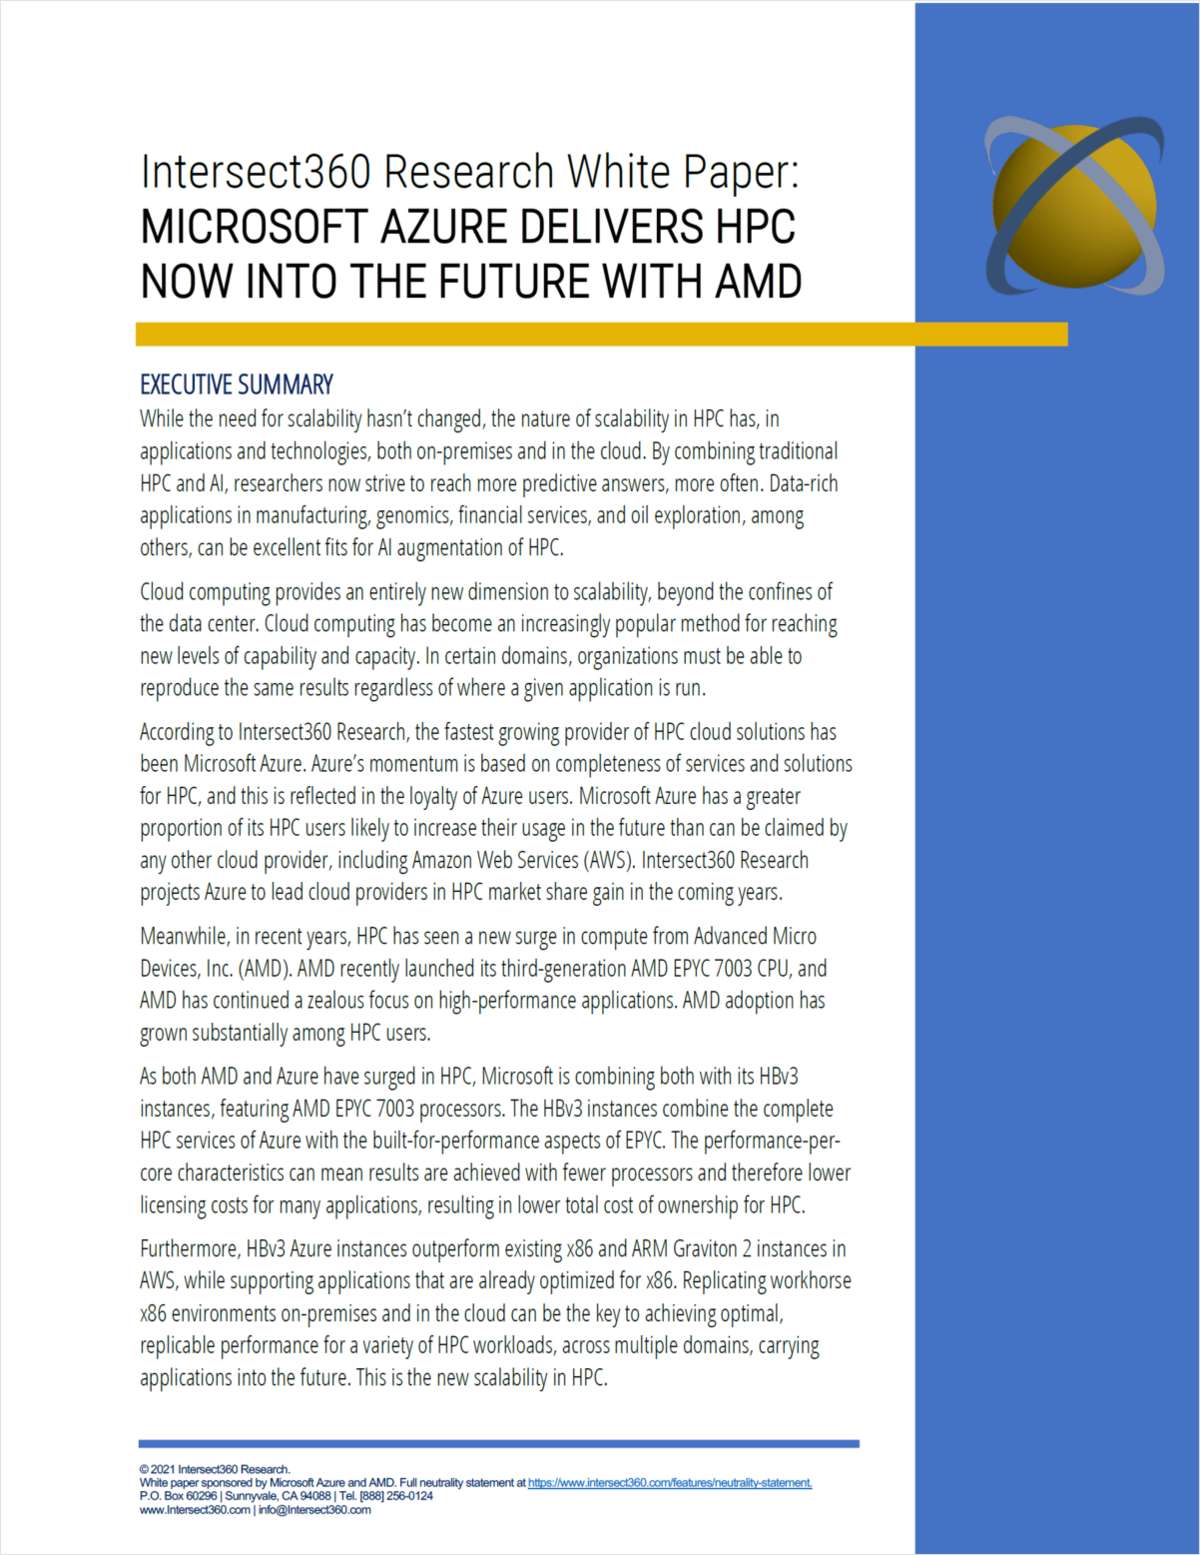 Intersect360 Research White Paper: Microsoft Azure Delivers HPC now into the Future with AMD